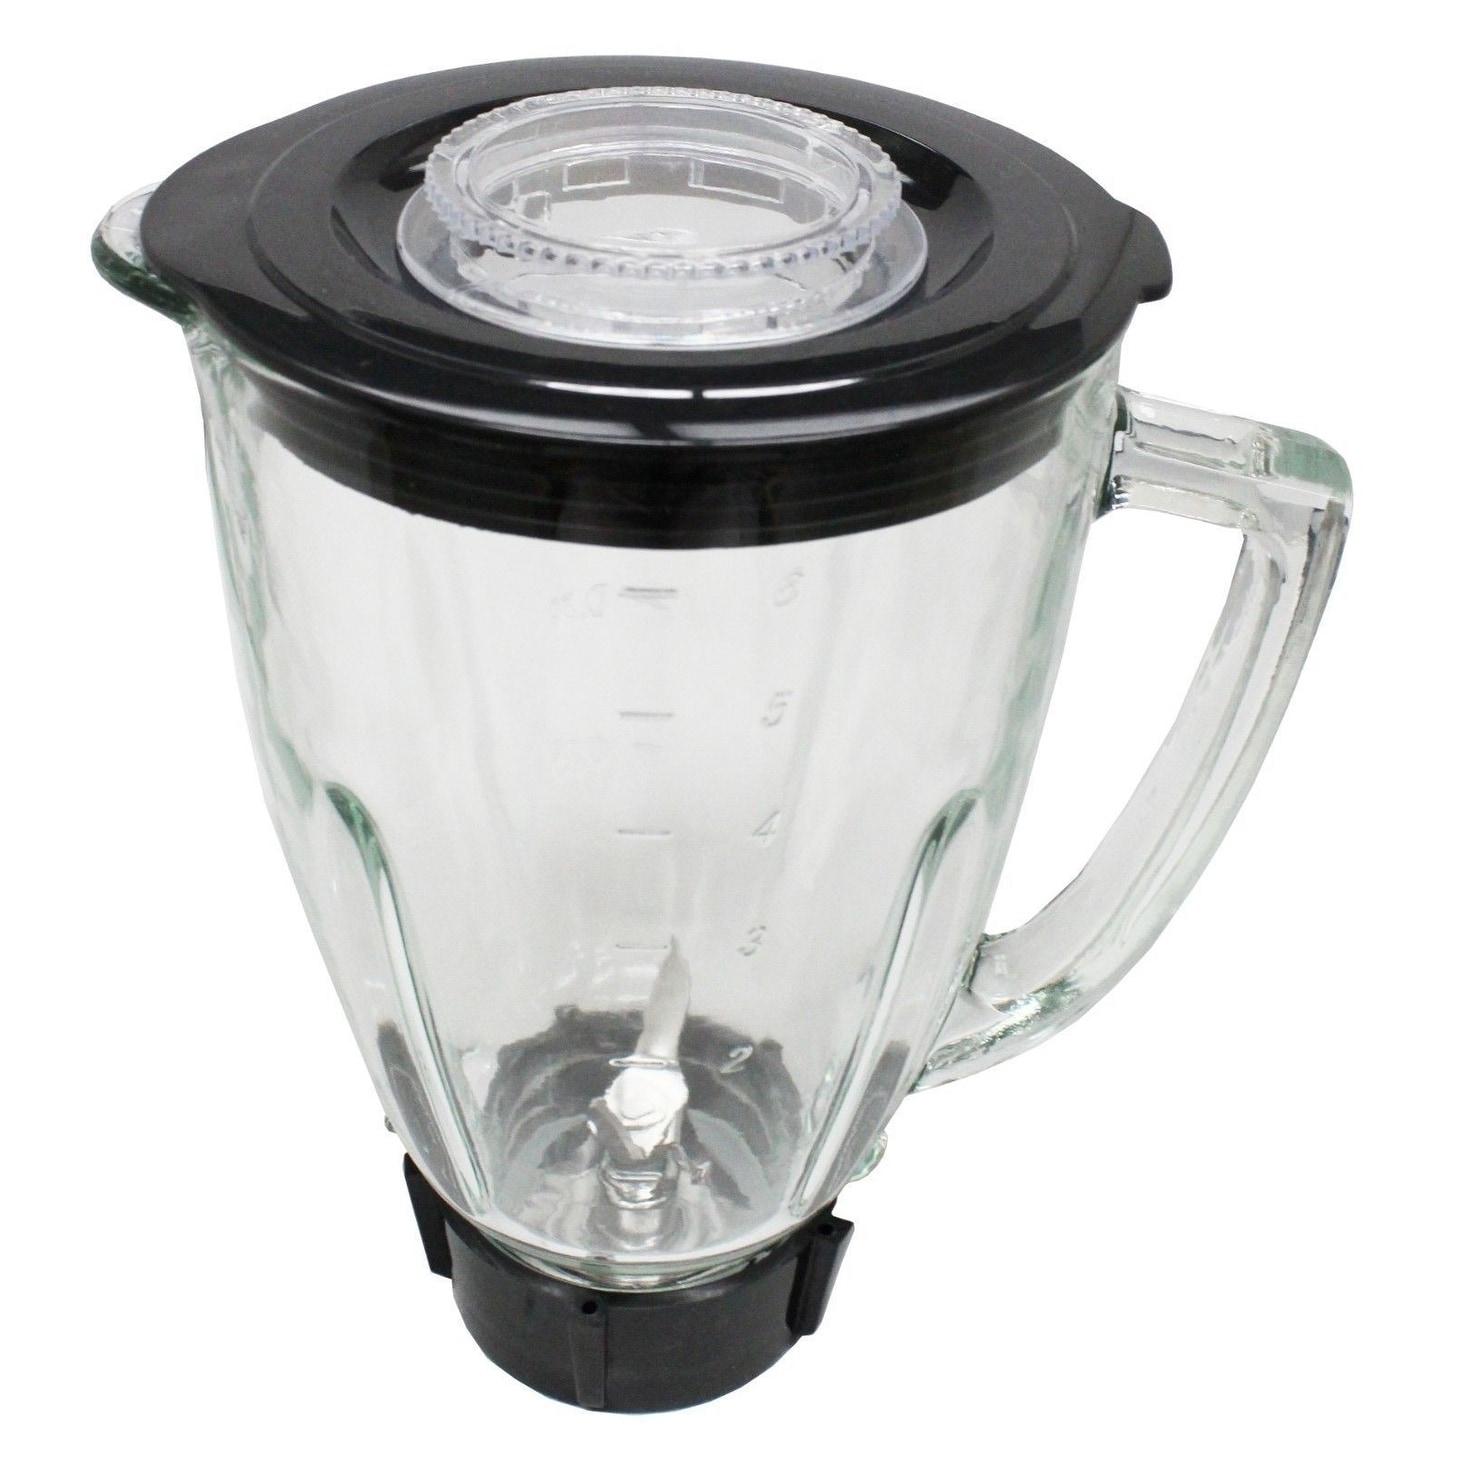  Oster Blender 6-Cup Glass Jar, Lid, Black and clear : Home &  Kitchen